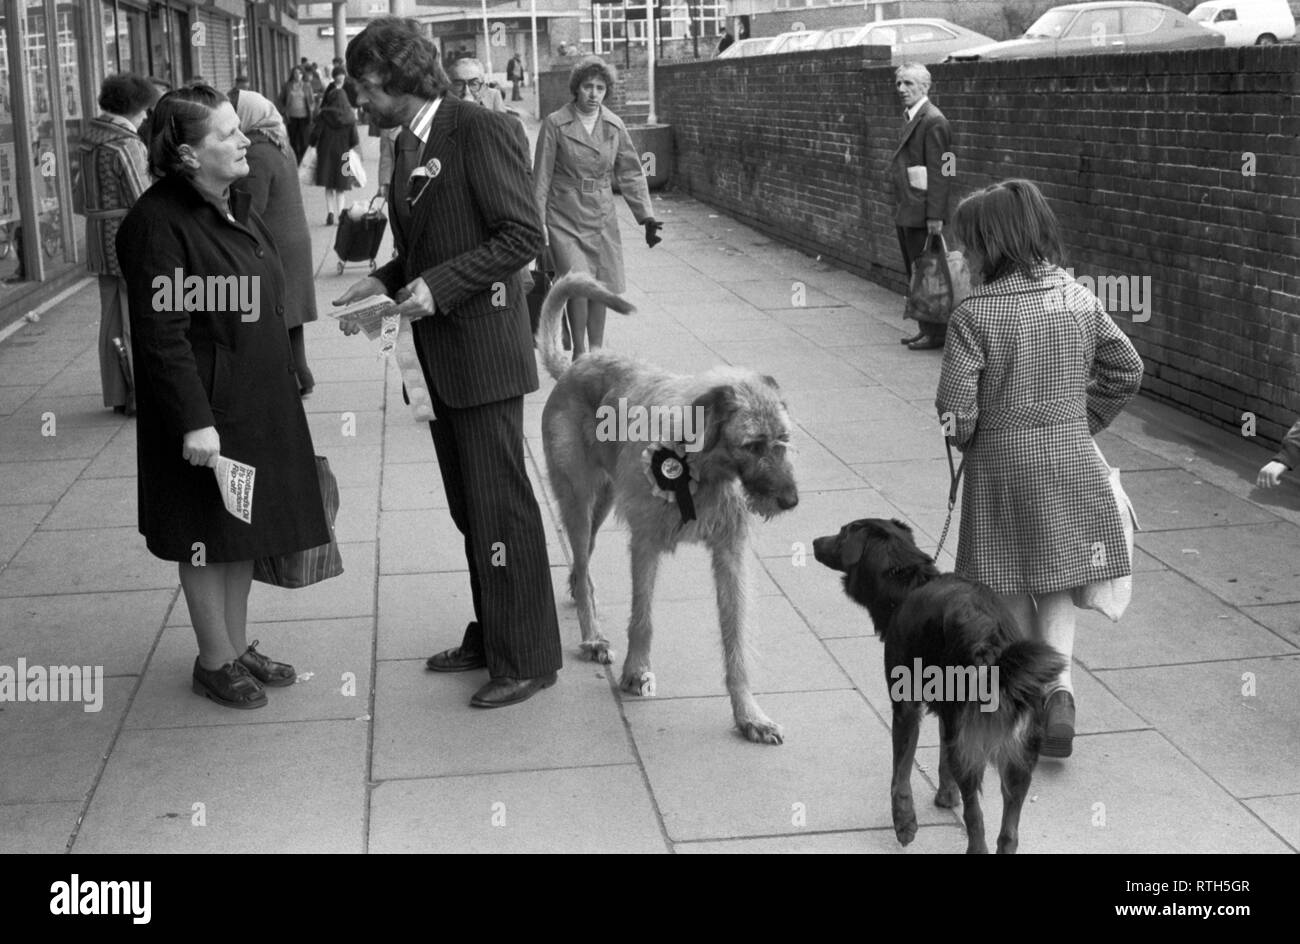 Politician electioneering with dog. Prospective MP SNP Scottish National Party Alex Ewing campaigning with his pet Wolf Hound 1979 Cathcart Glasgow. 1970s. He did not win and came third to labour and then Conservative. HOMER SYKES Stock Photo